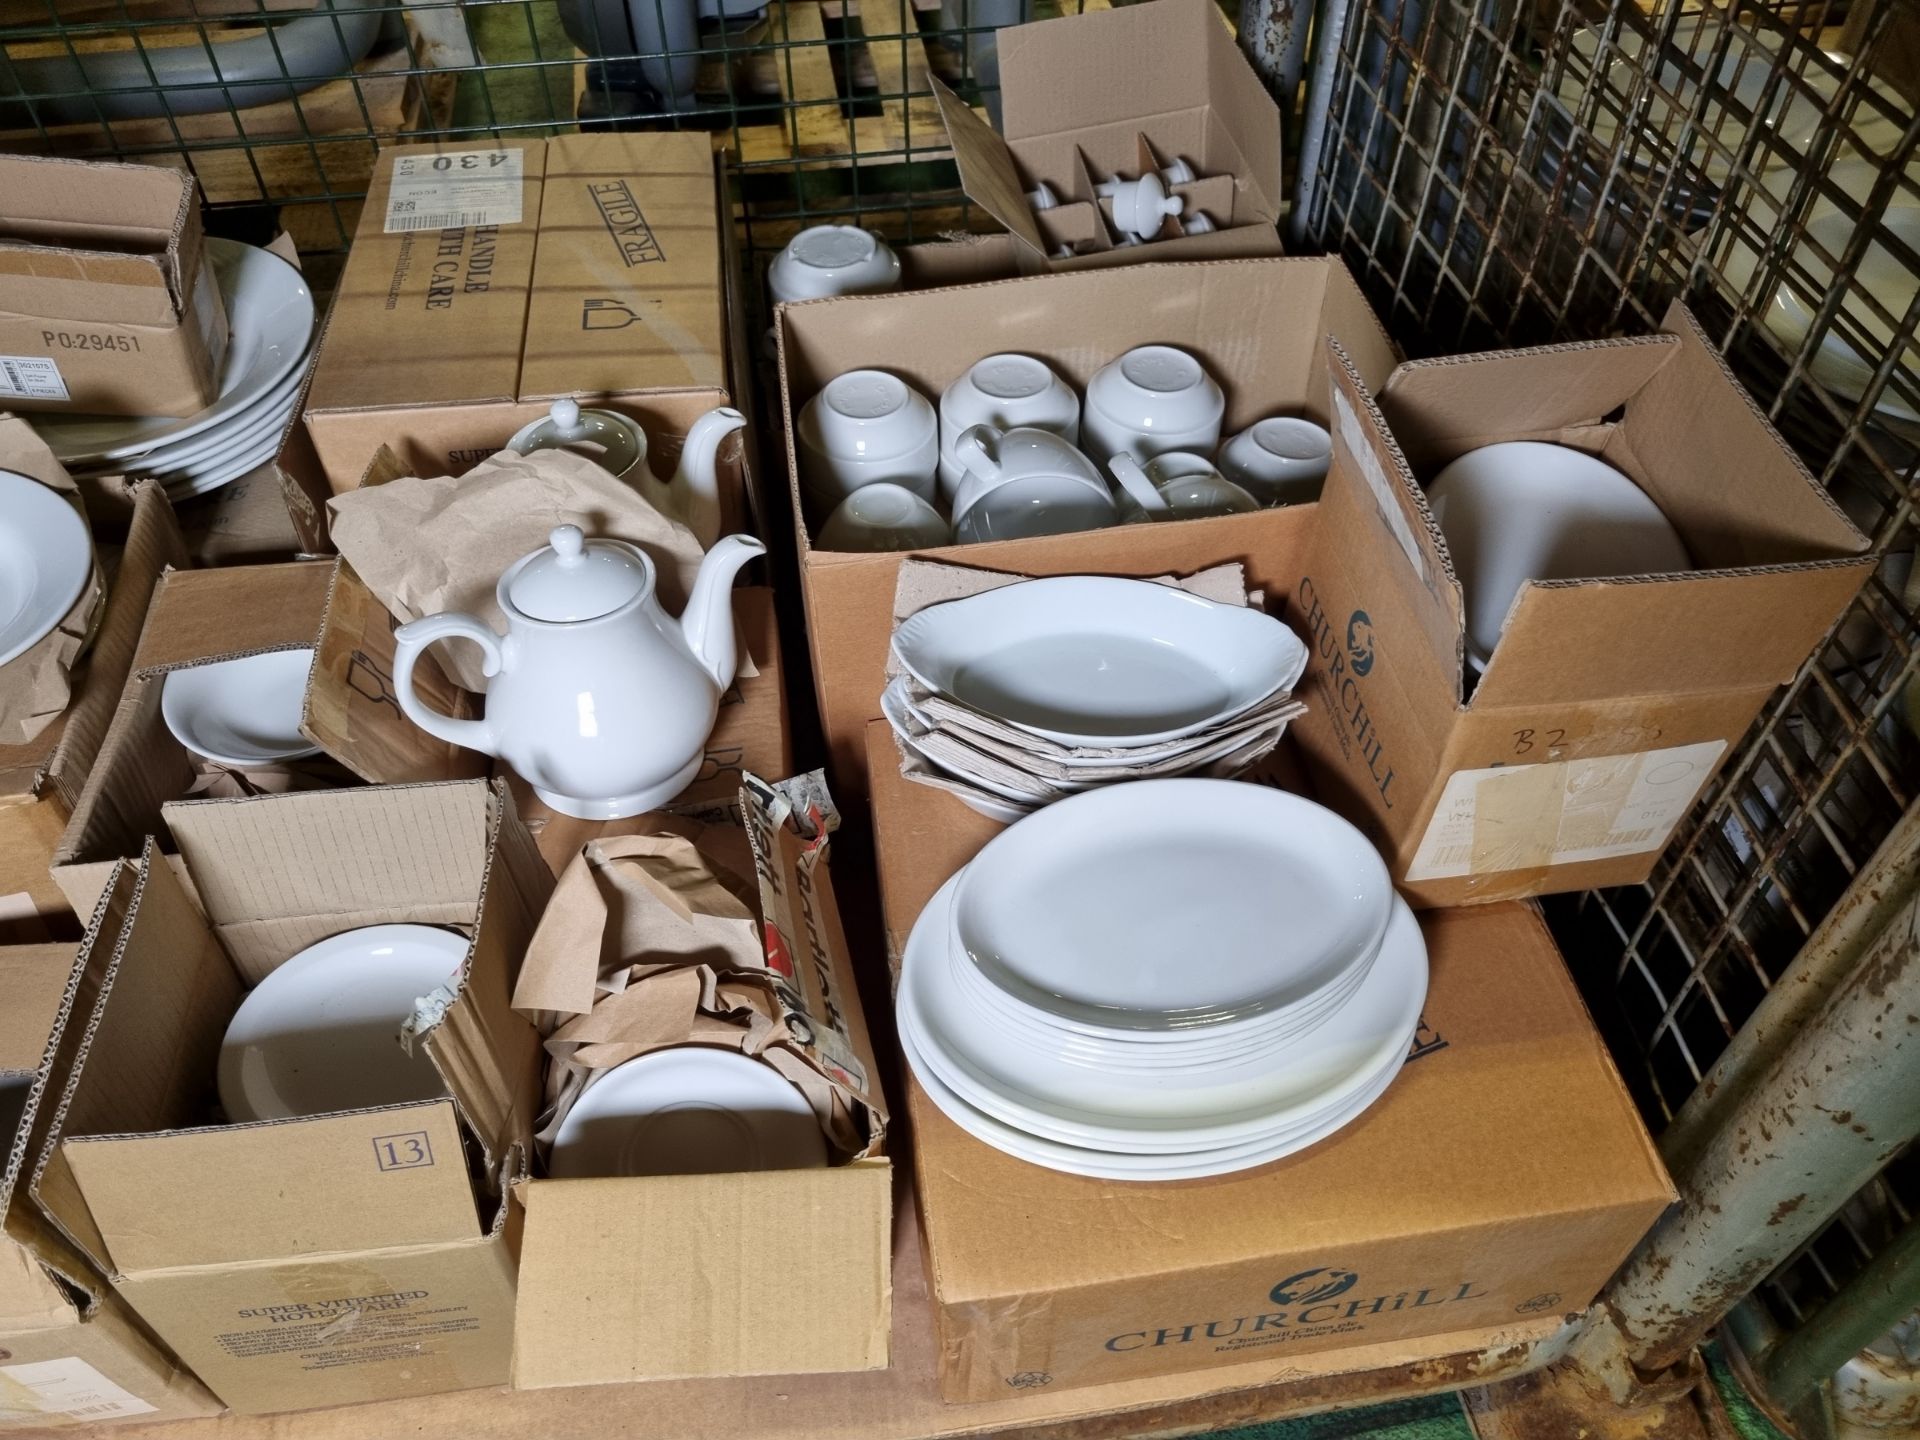 Catering Equipment - White plates, saucers, bowls, cups, teapot, salt + pepper pot - Image 4 of 5